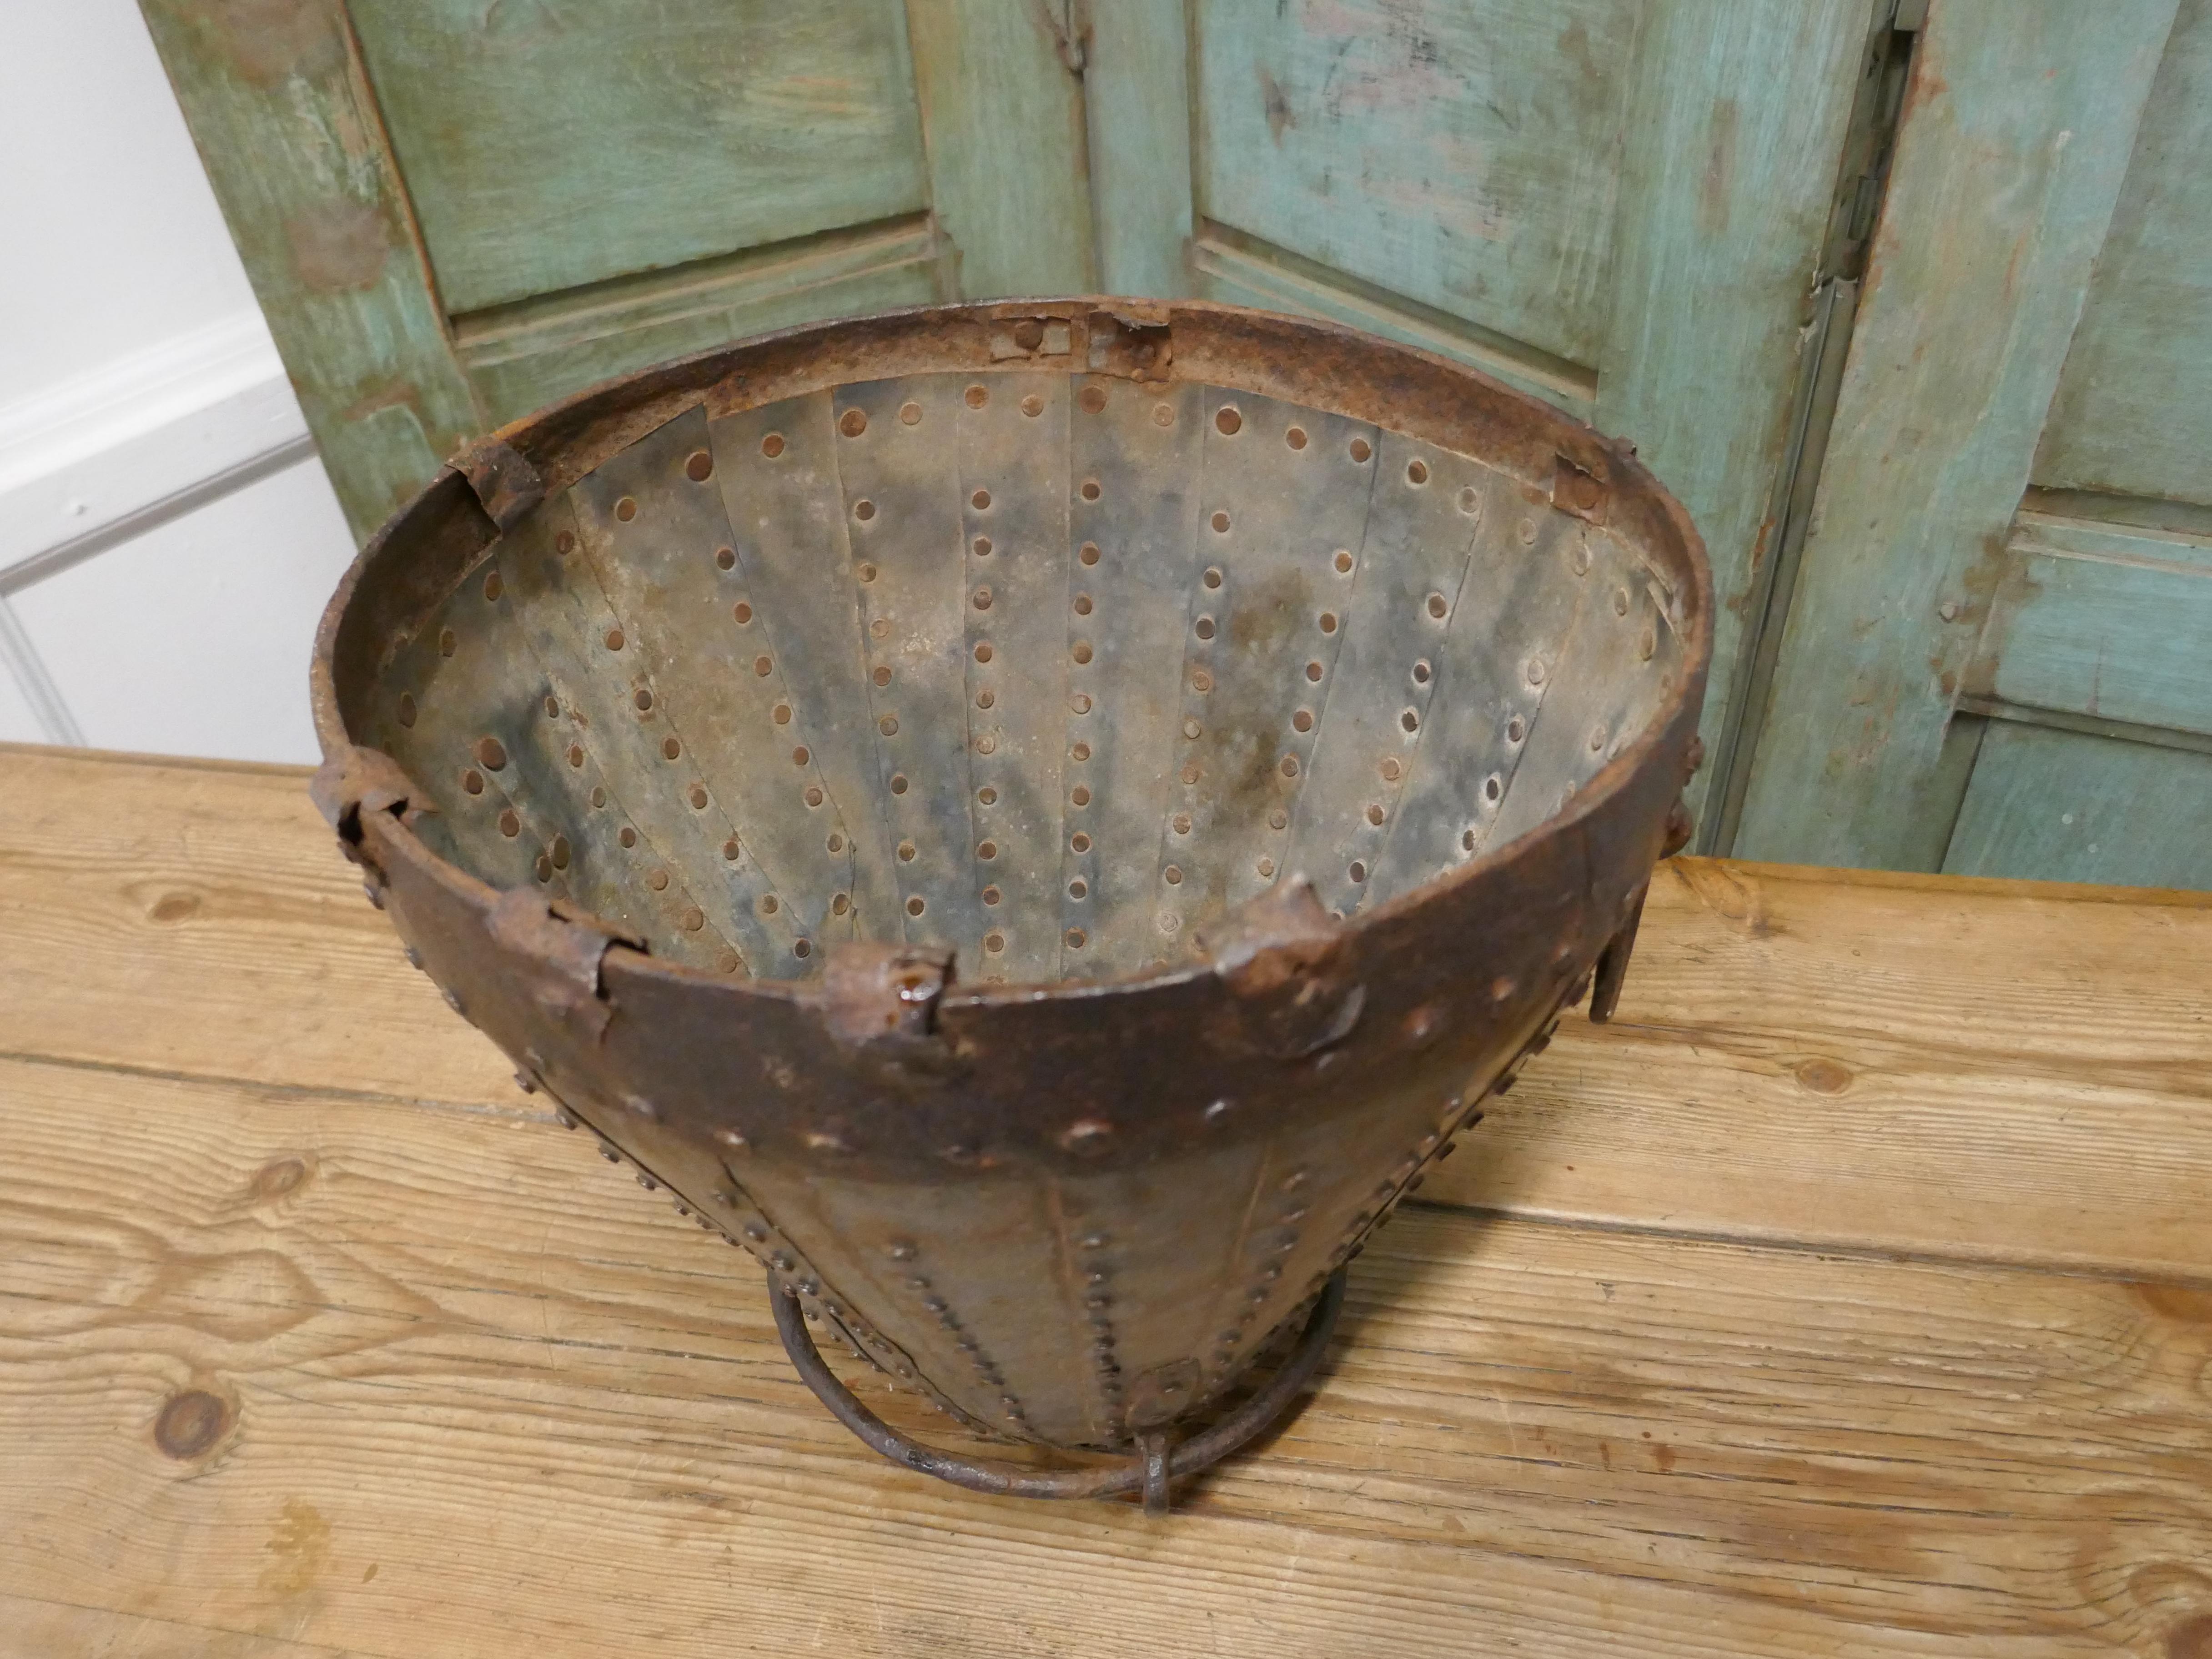 19th century Brutalist North African water bucket

Stud and riveted water bucket from North Africa

An amazing piece, the main body is made up with layered riveted strips of metal, there is an Iron top rim and bottom, ring handles and lower